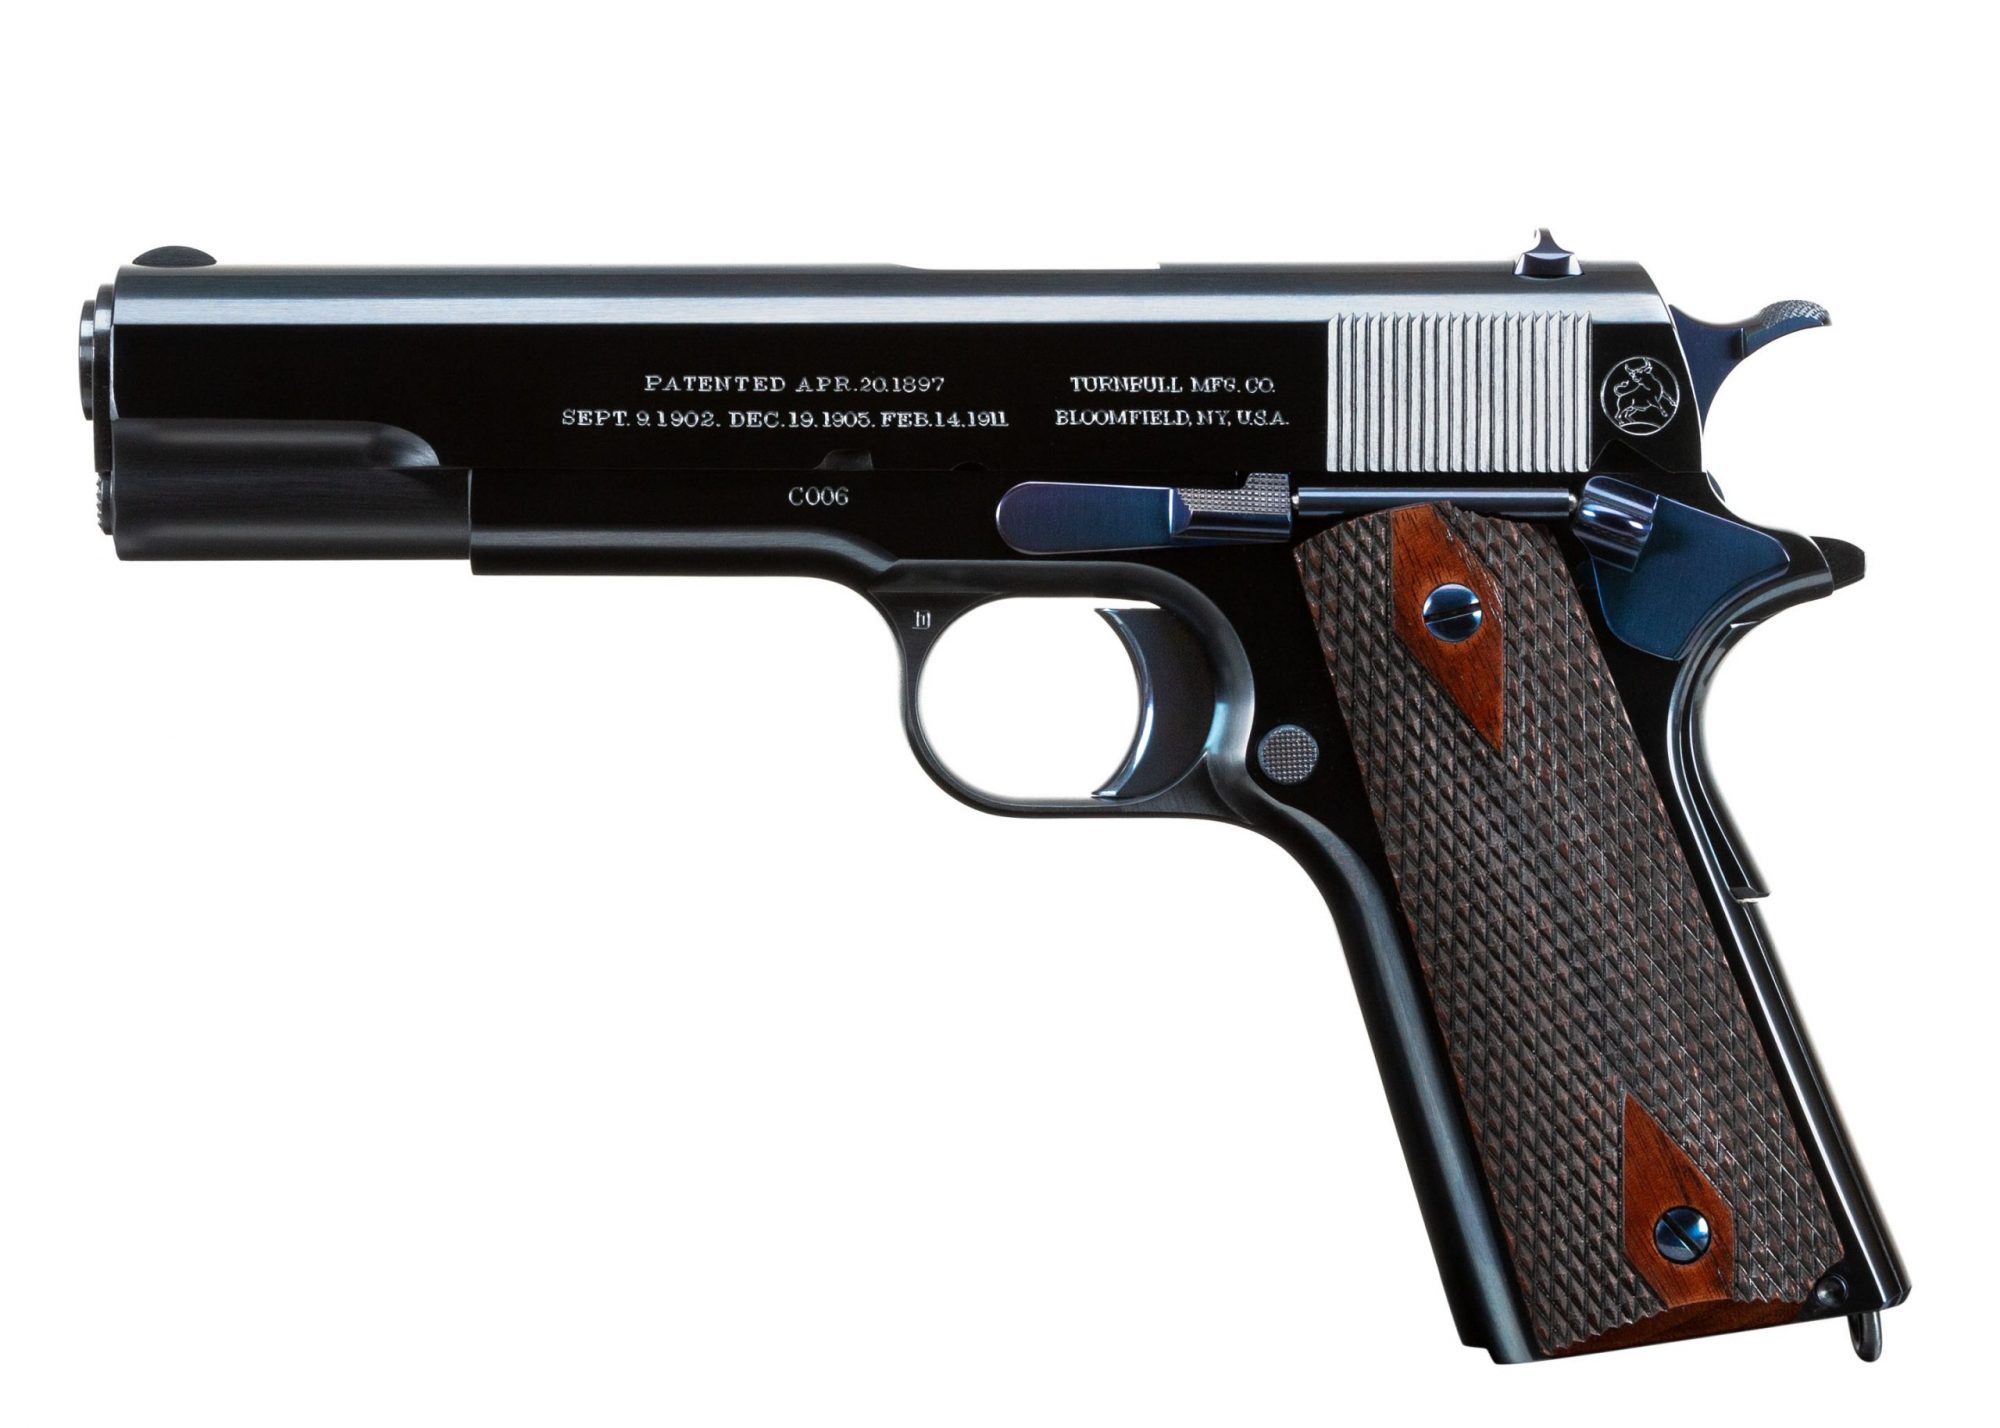 Photo of a Turnbull Commercial Model 1911, a 1912-era Model 1911 reproduction built by Turnbull Restoration the experts of classic Model 1911 restoration